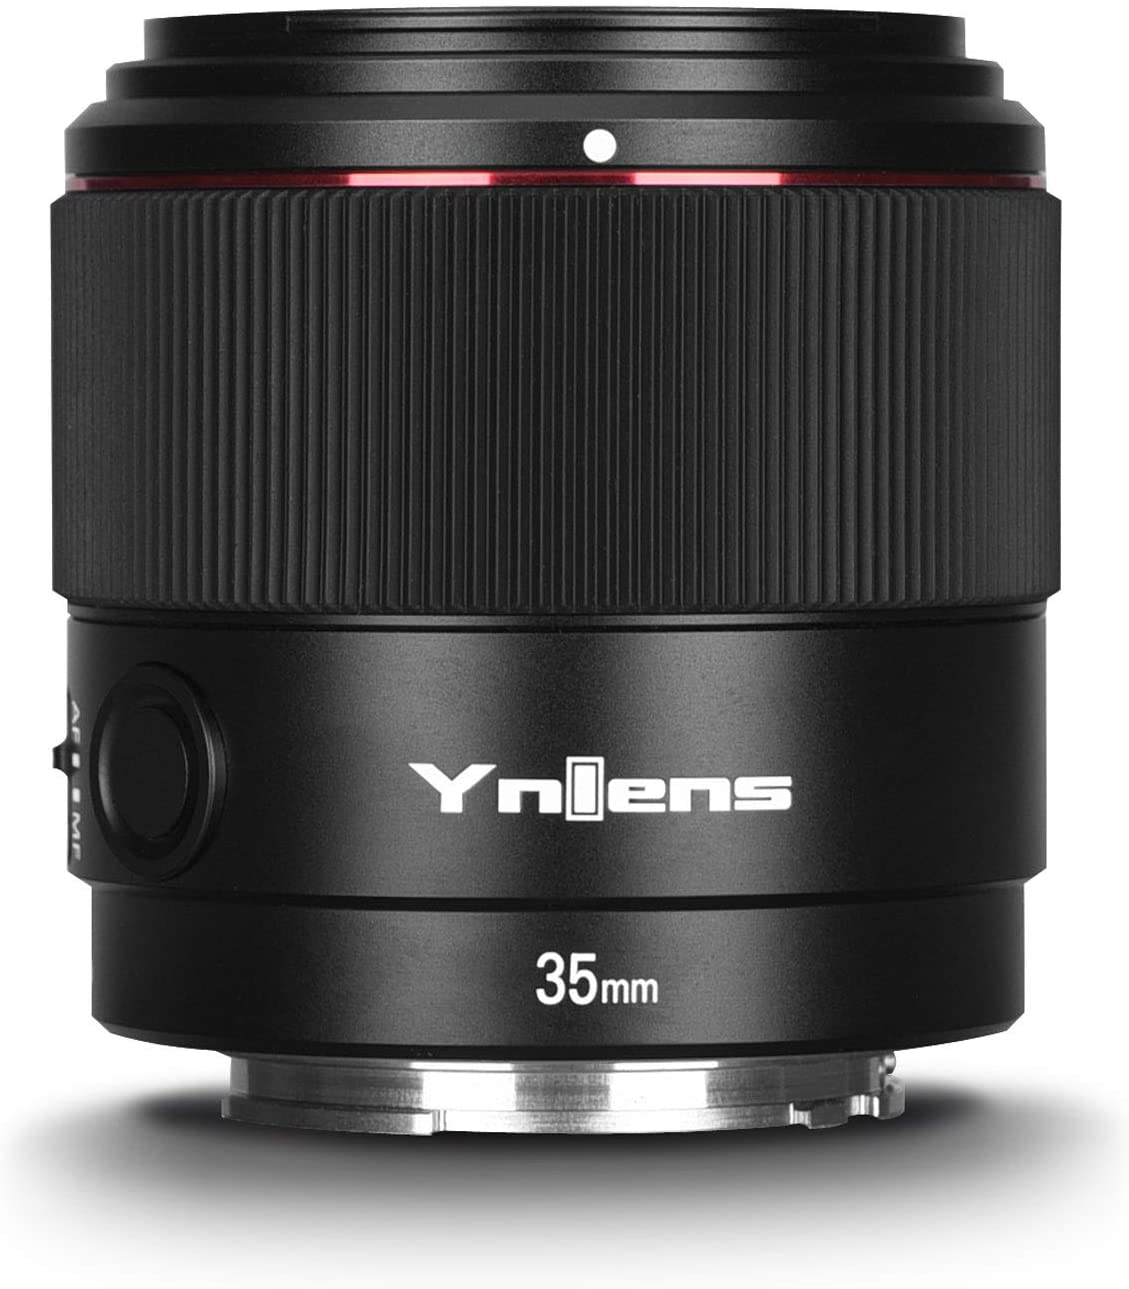 Yongnuo 35mm F2.0S DF DSM Auto Focus Wide Angle Prime Lens for Sony, F2 Large Aperture Full Frame APS-C for Sony E Mount Camera YN35MM